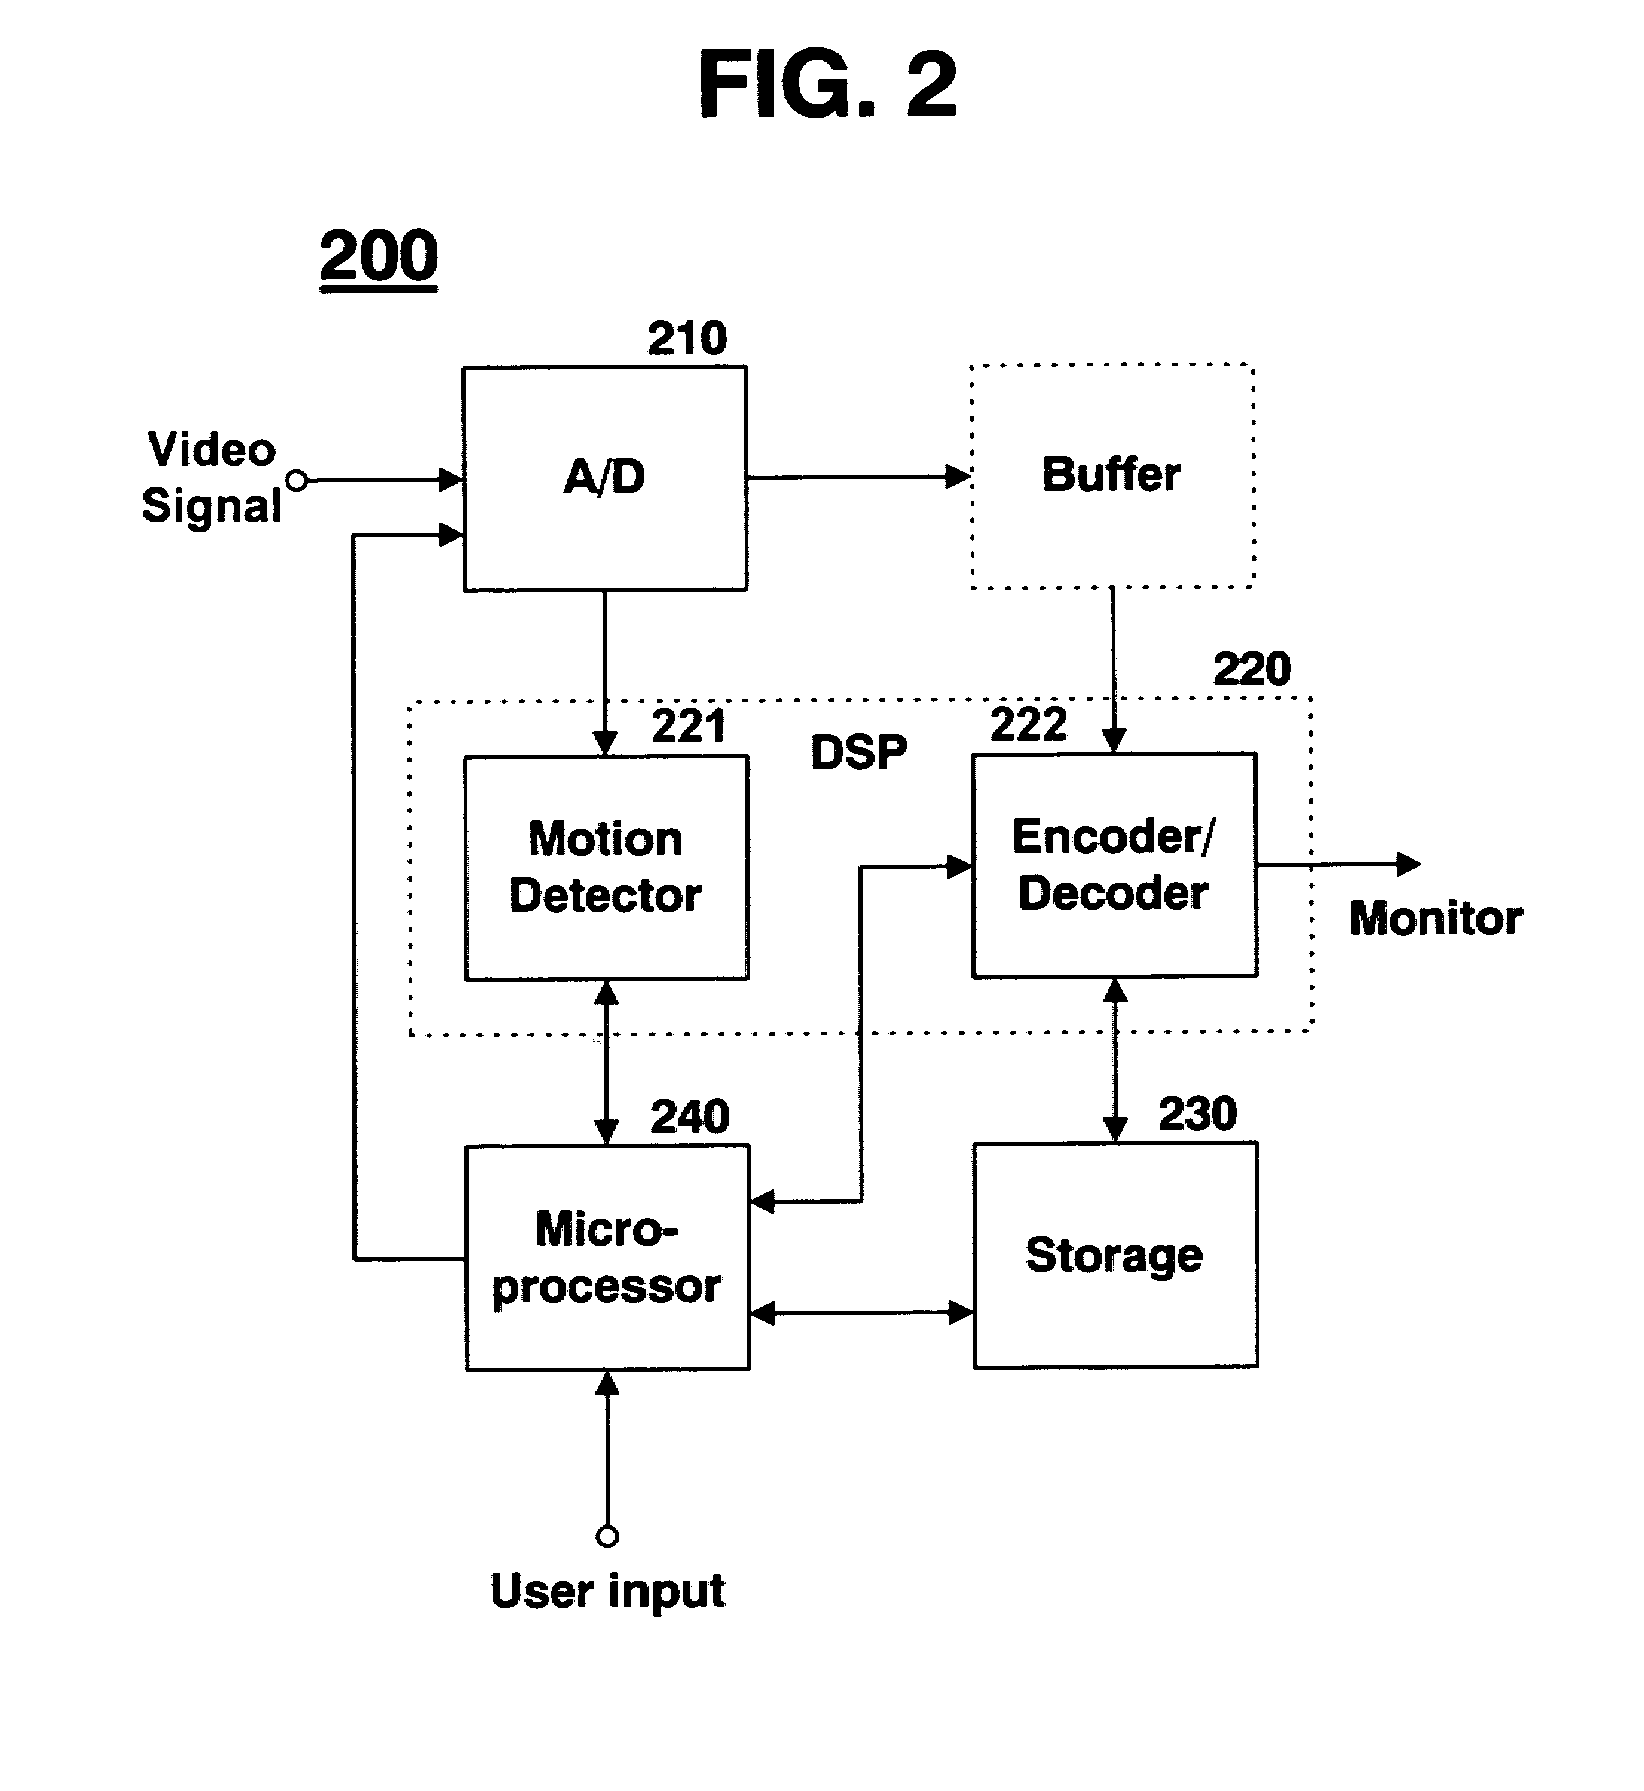 Method of recording and reproducing surveillance images in DVR